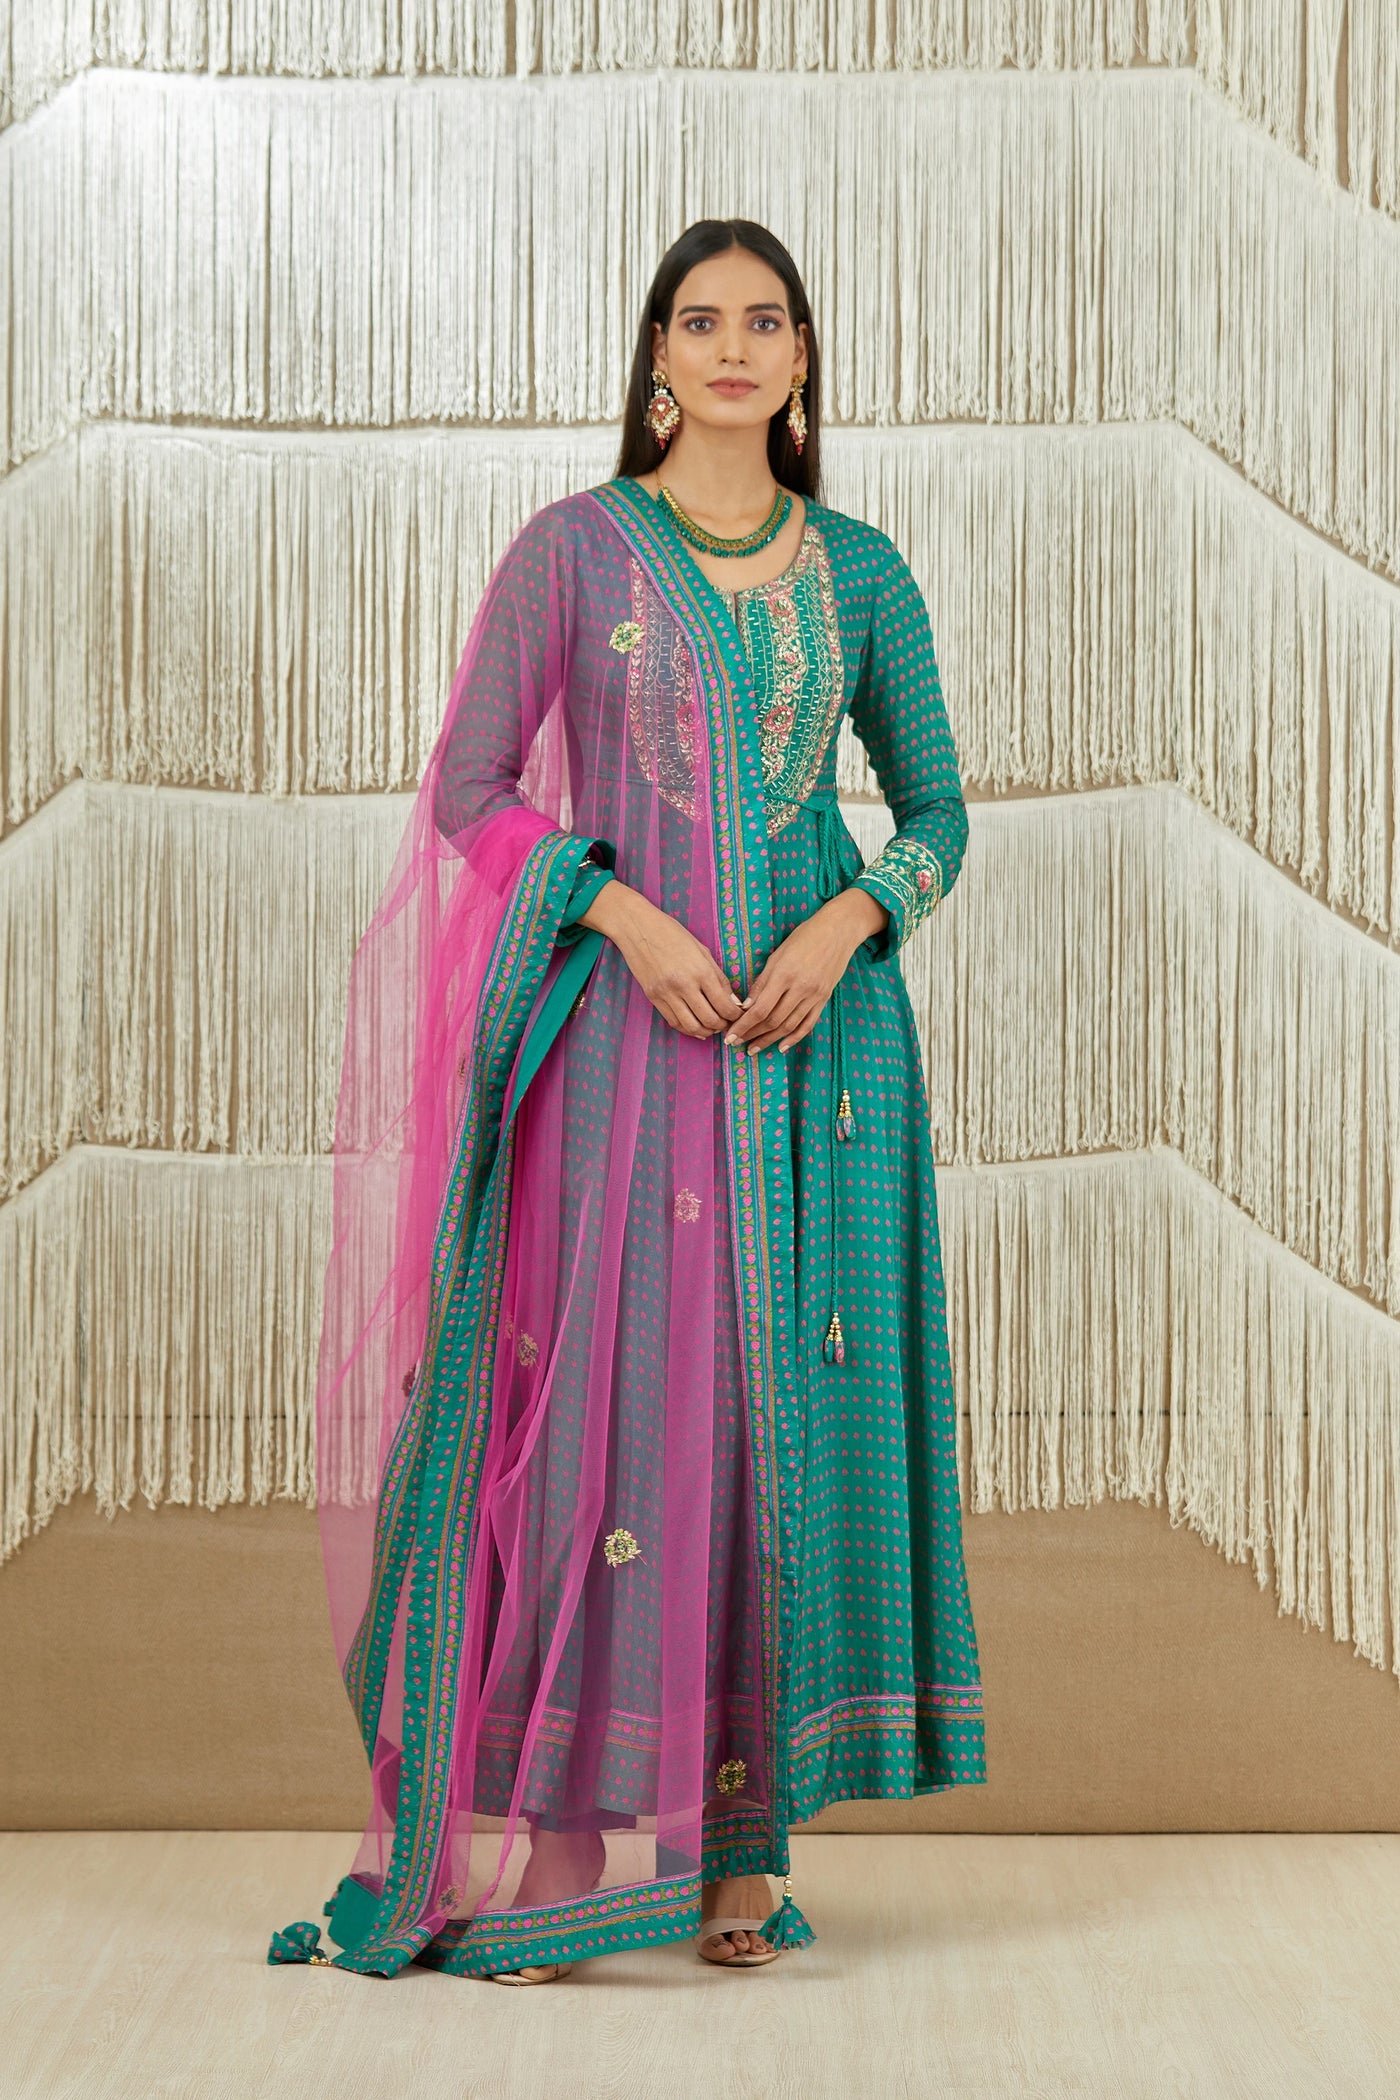 Teal Zardozi Anarkali Set Indian Clothing in Denver, CO, Aurora, CO, Boulder, CO, Fort Collins, CO, Colorado Springs, CO, Parker, CO, Highlands Ranch, CO, Cherry Creek, CO, Centennial, CO, and Longmont, CO. NATIONWIDE SHIPPING USA- India Fashion X